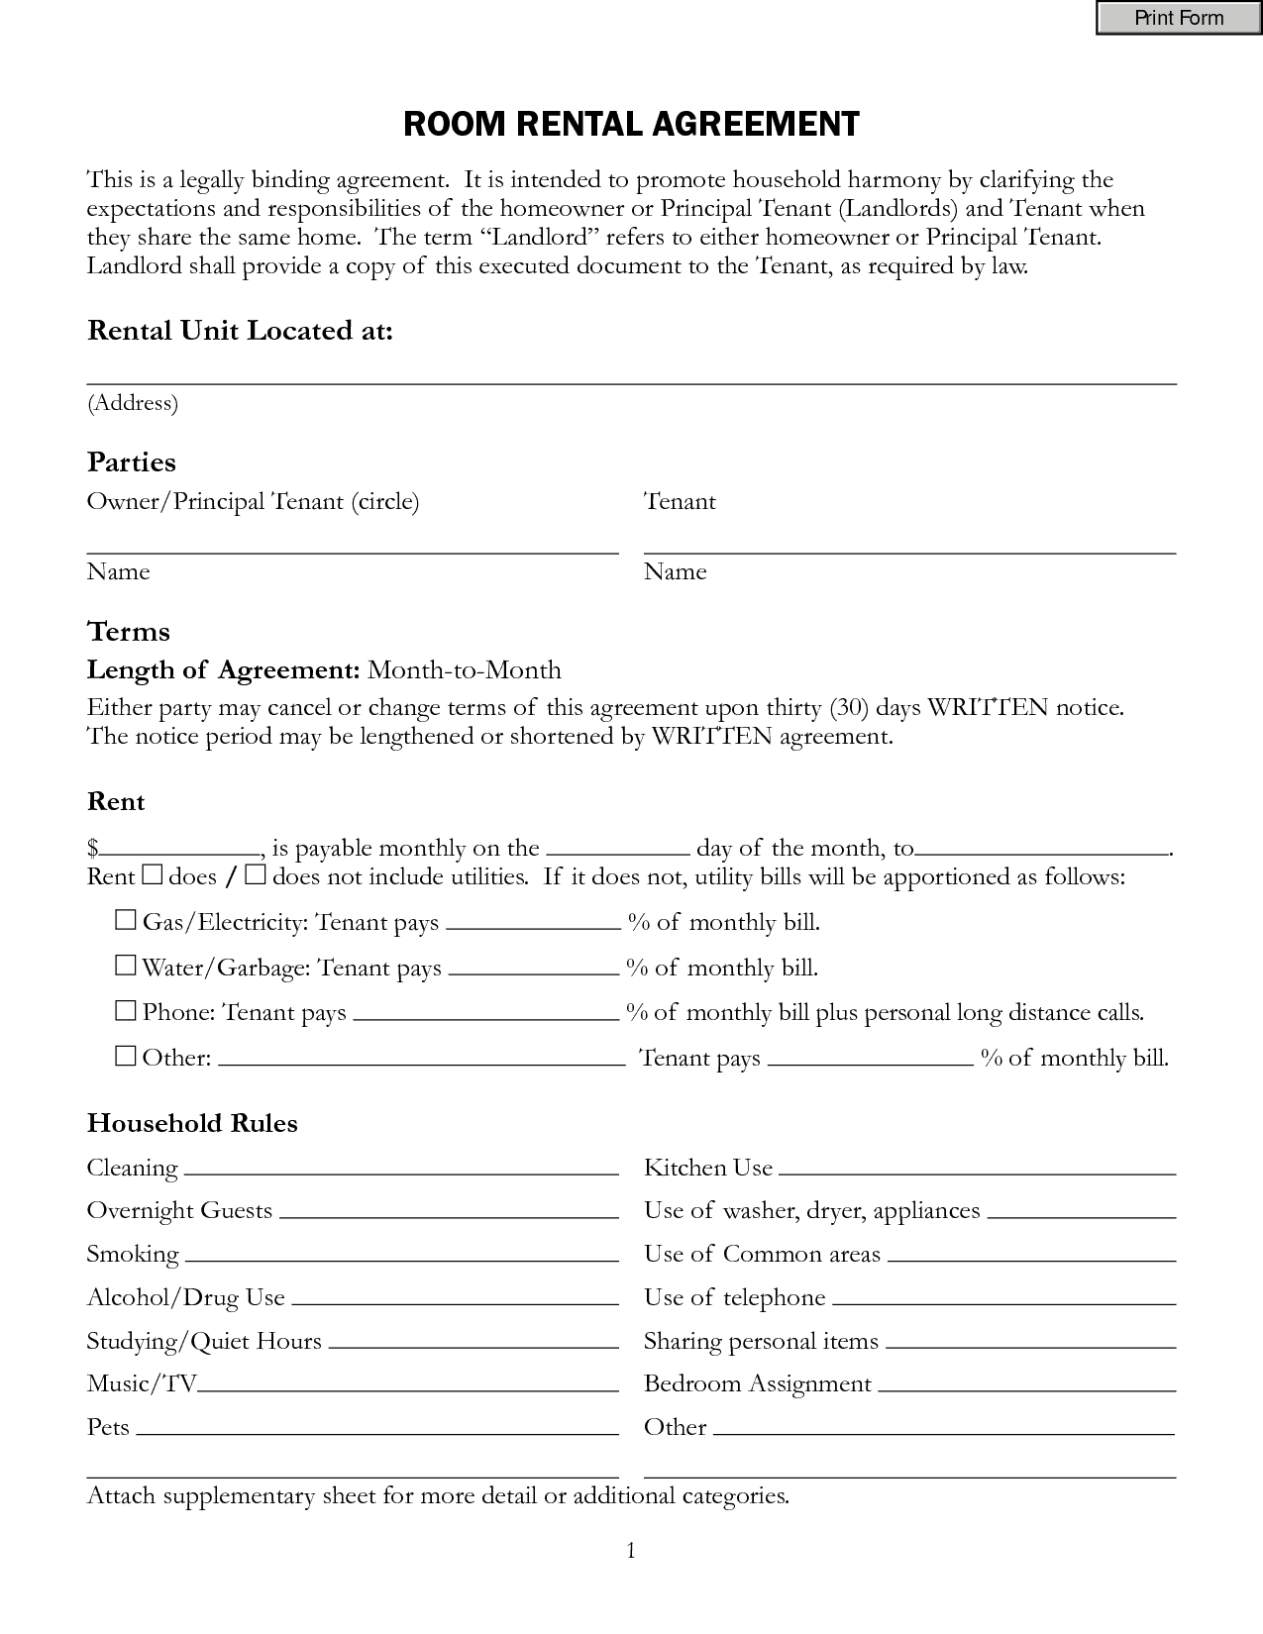 Top 5 Resources To Get Free Rental Agreement Templates - Word Templates Throughout Simple House Rental Agreement Template